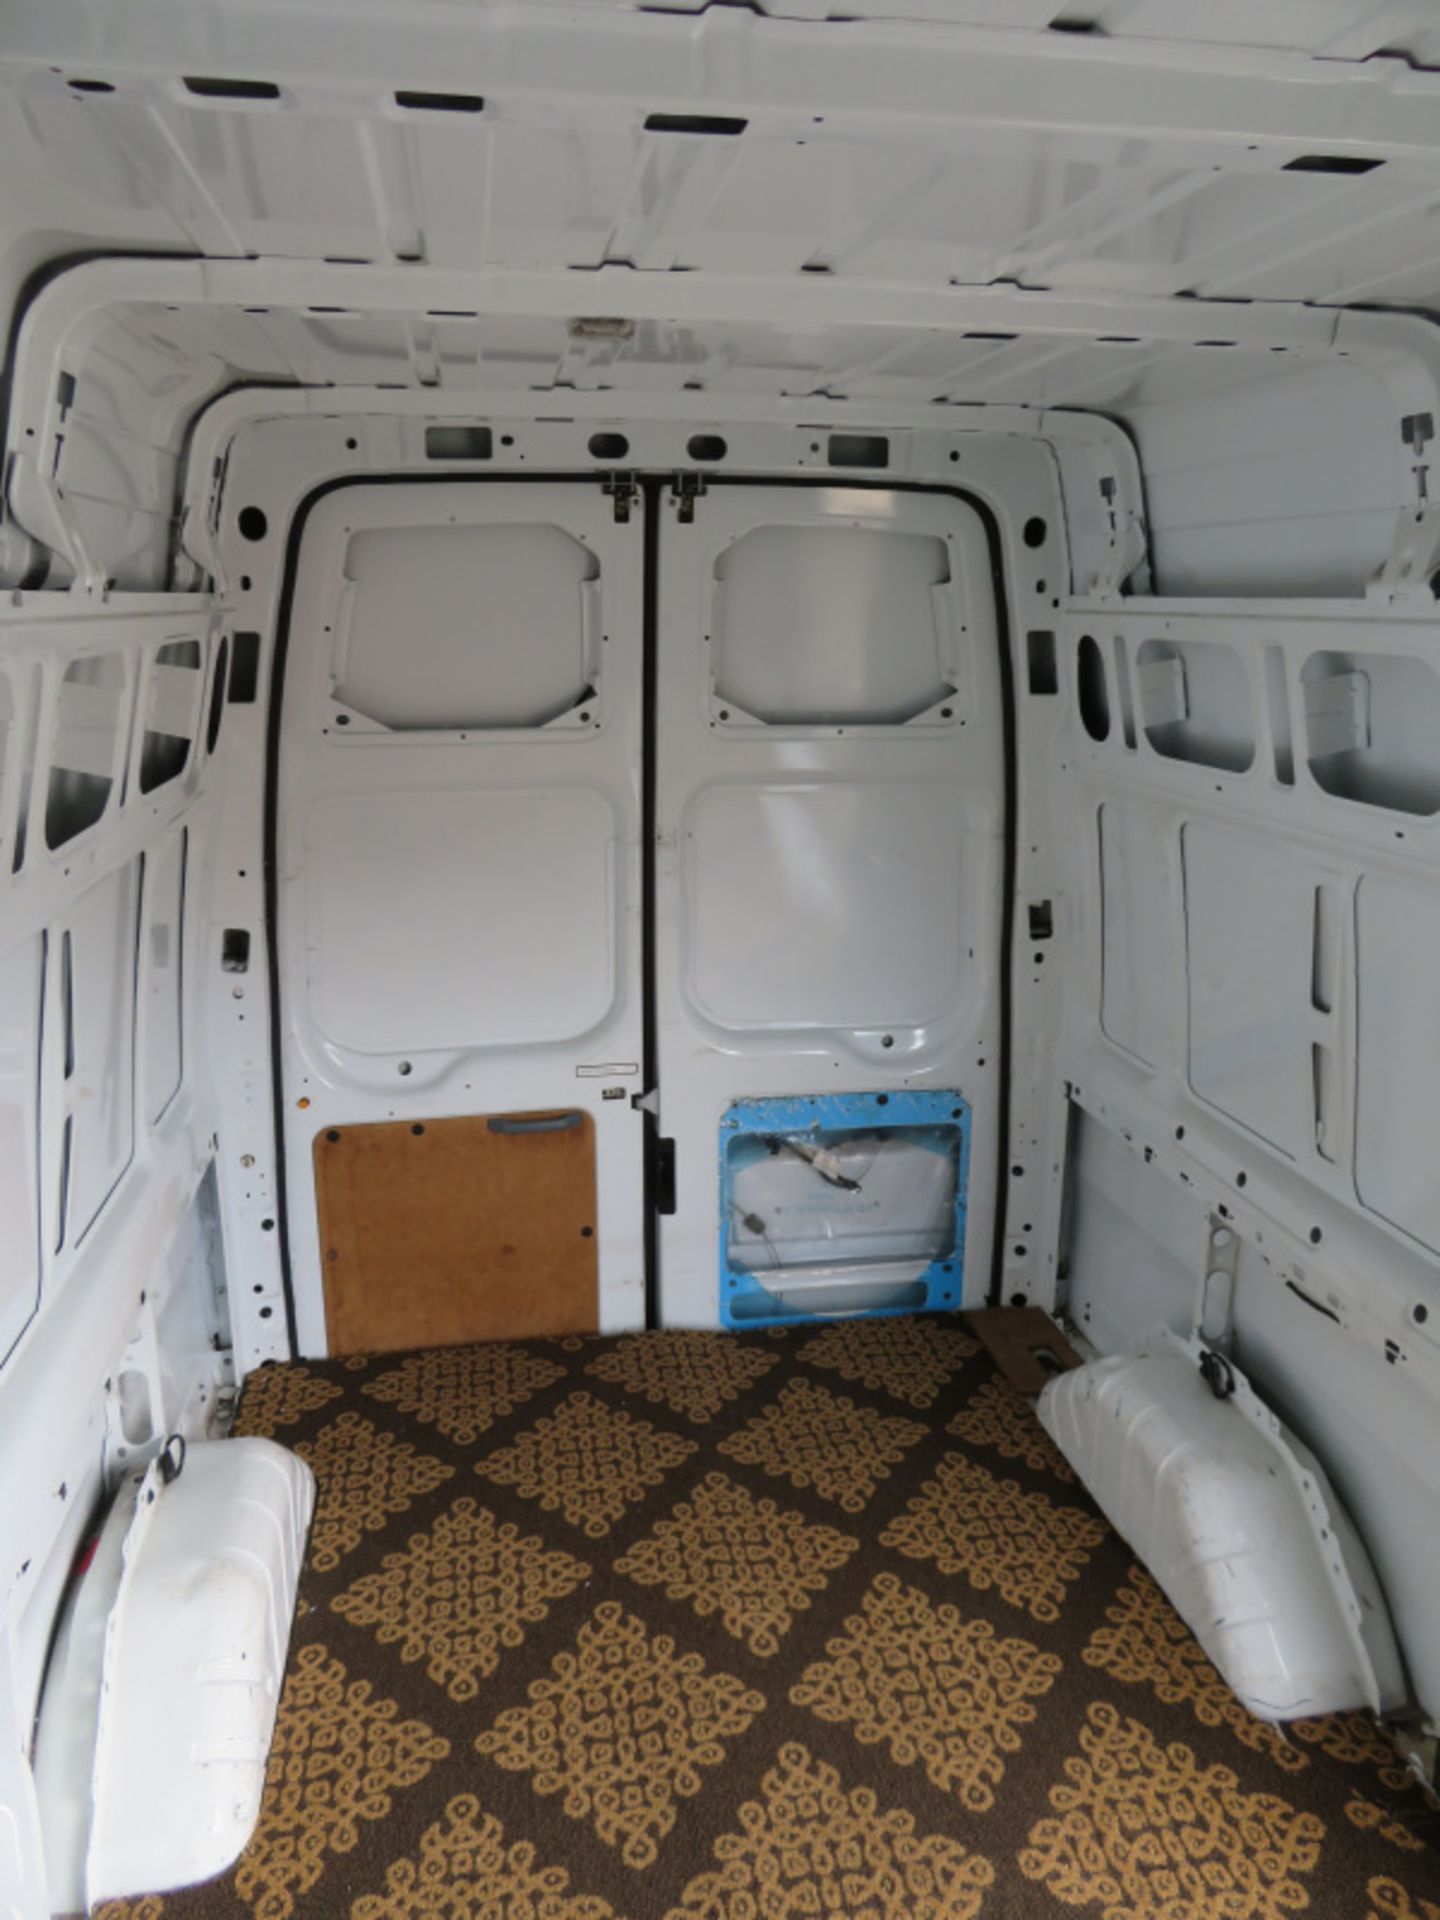 Ford Transit High Van Roof, Petrol, Mileage 33357 mile, Air conditioning, Runs & drives well on - Image 13 of 21